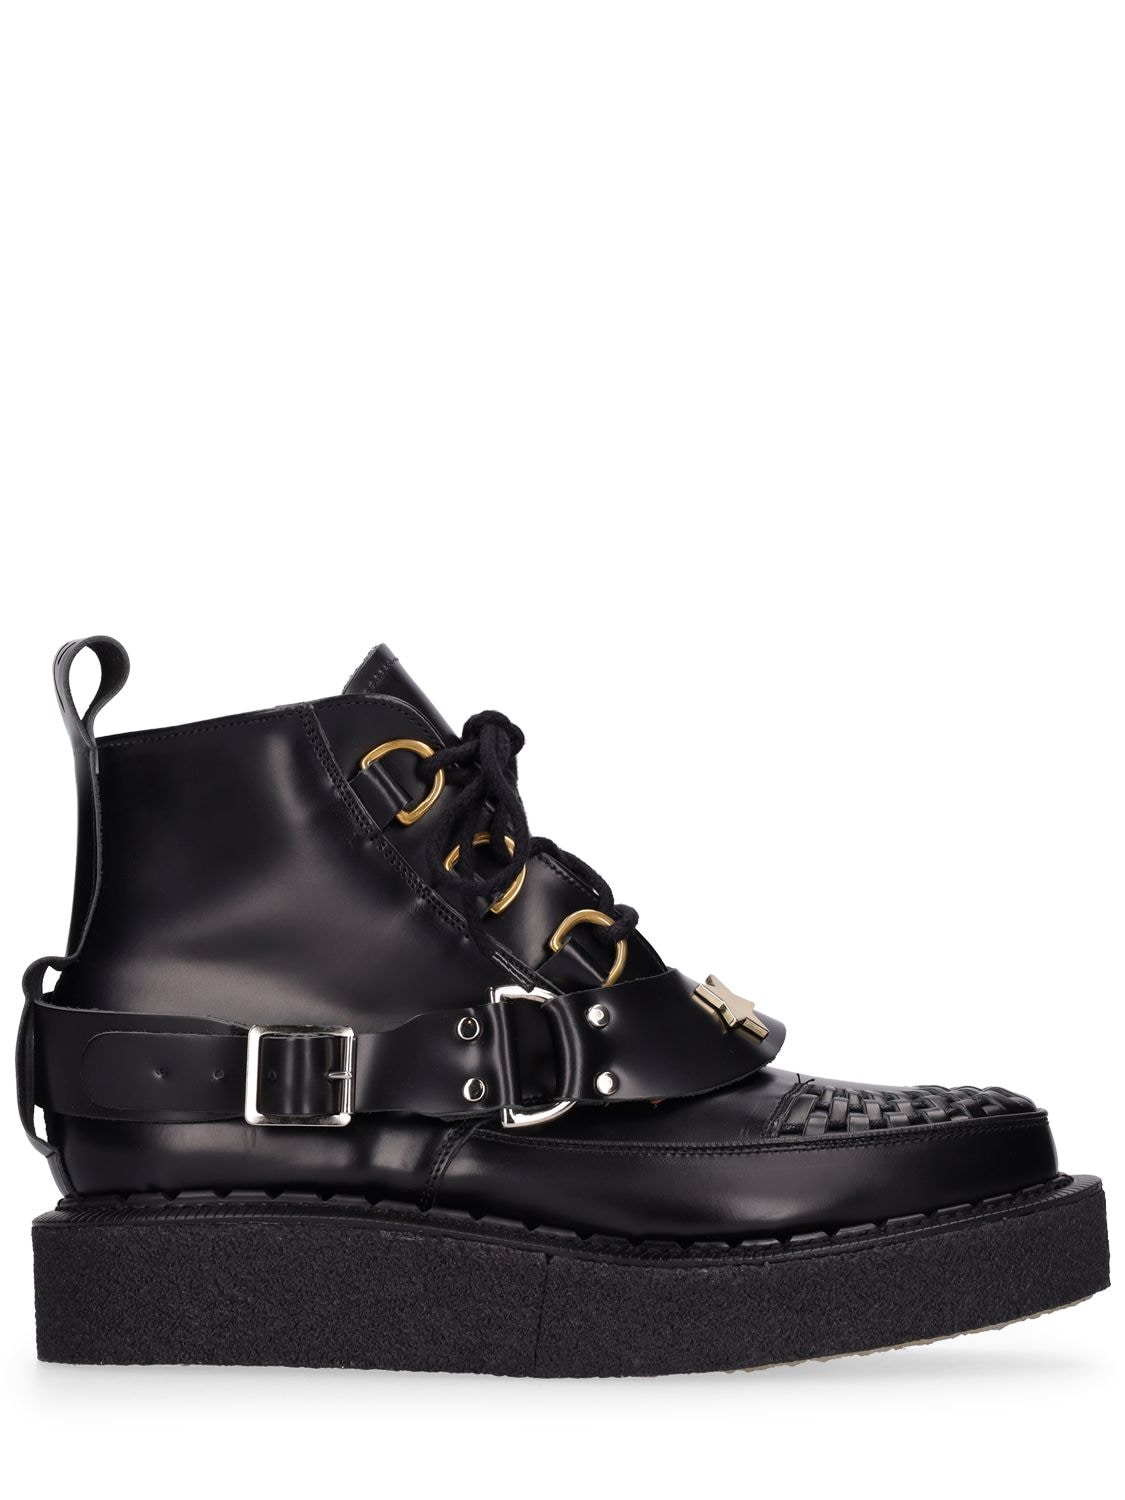 CHARLES JEFFREY LOVERBOY LOVERBOY X GEORGE COX LEATHER BOOTS